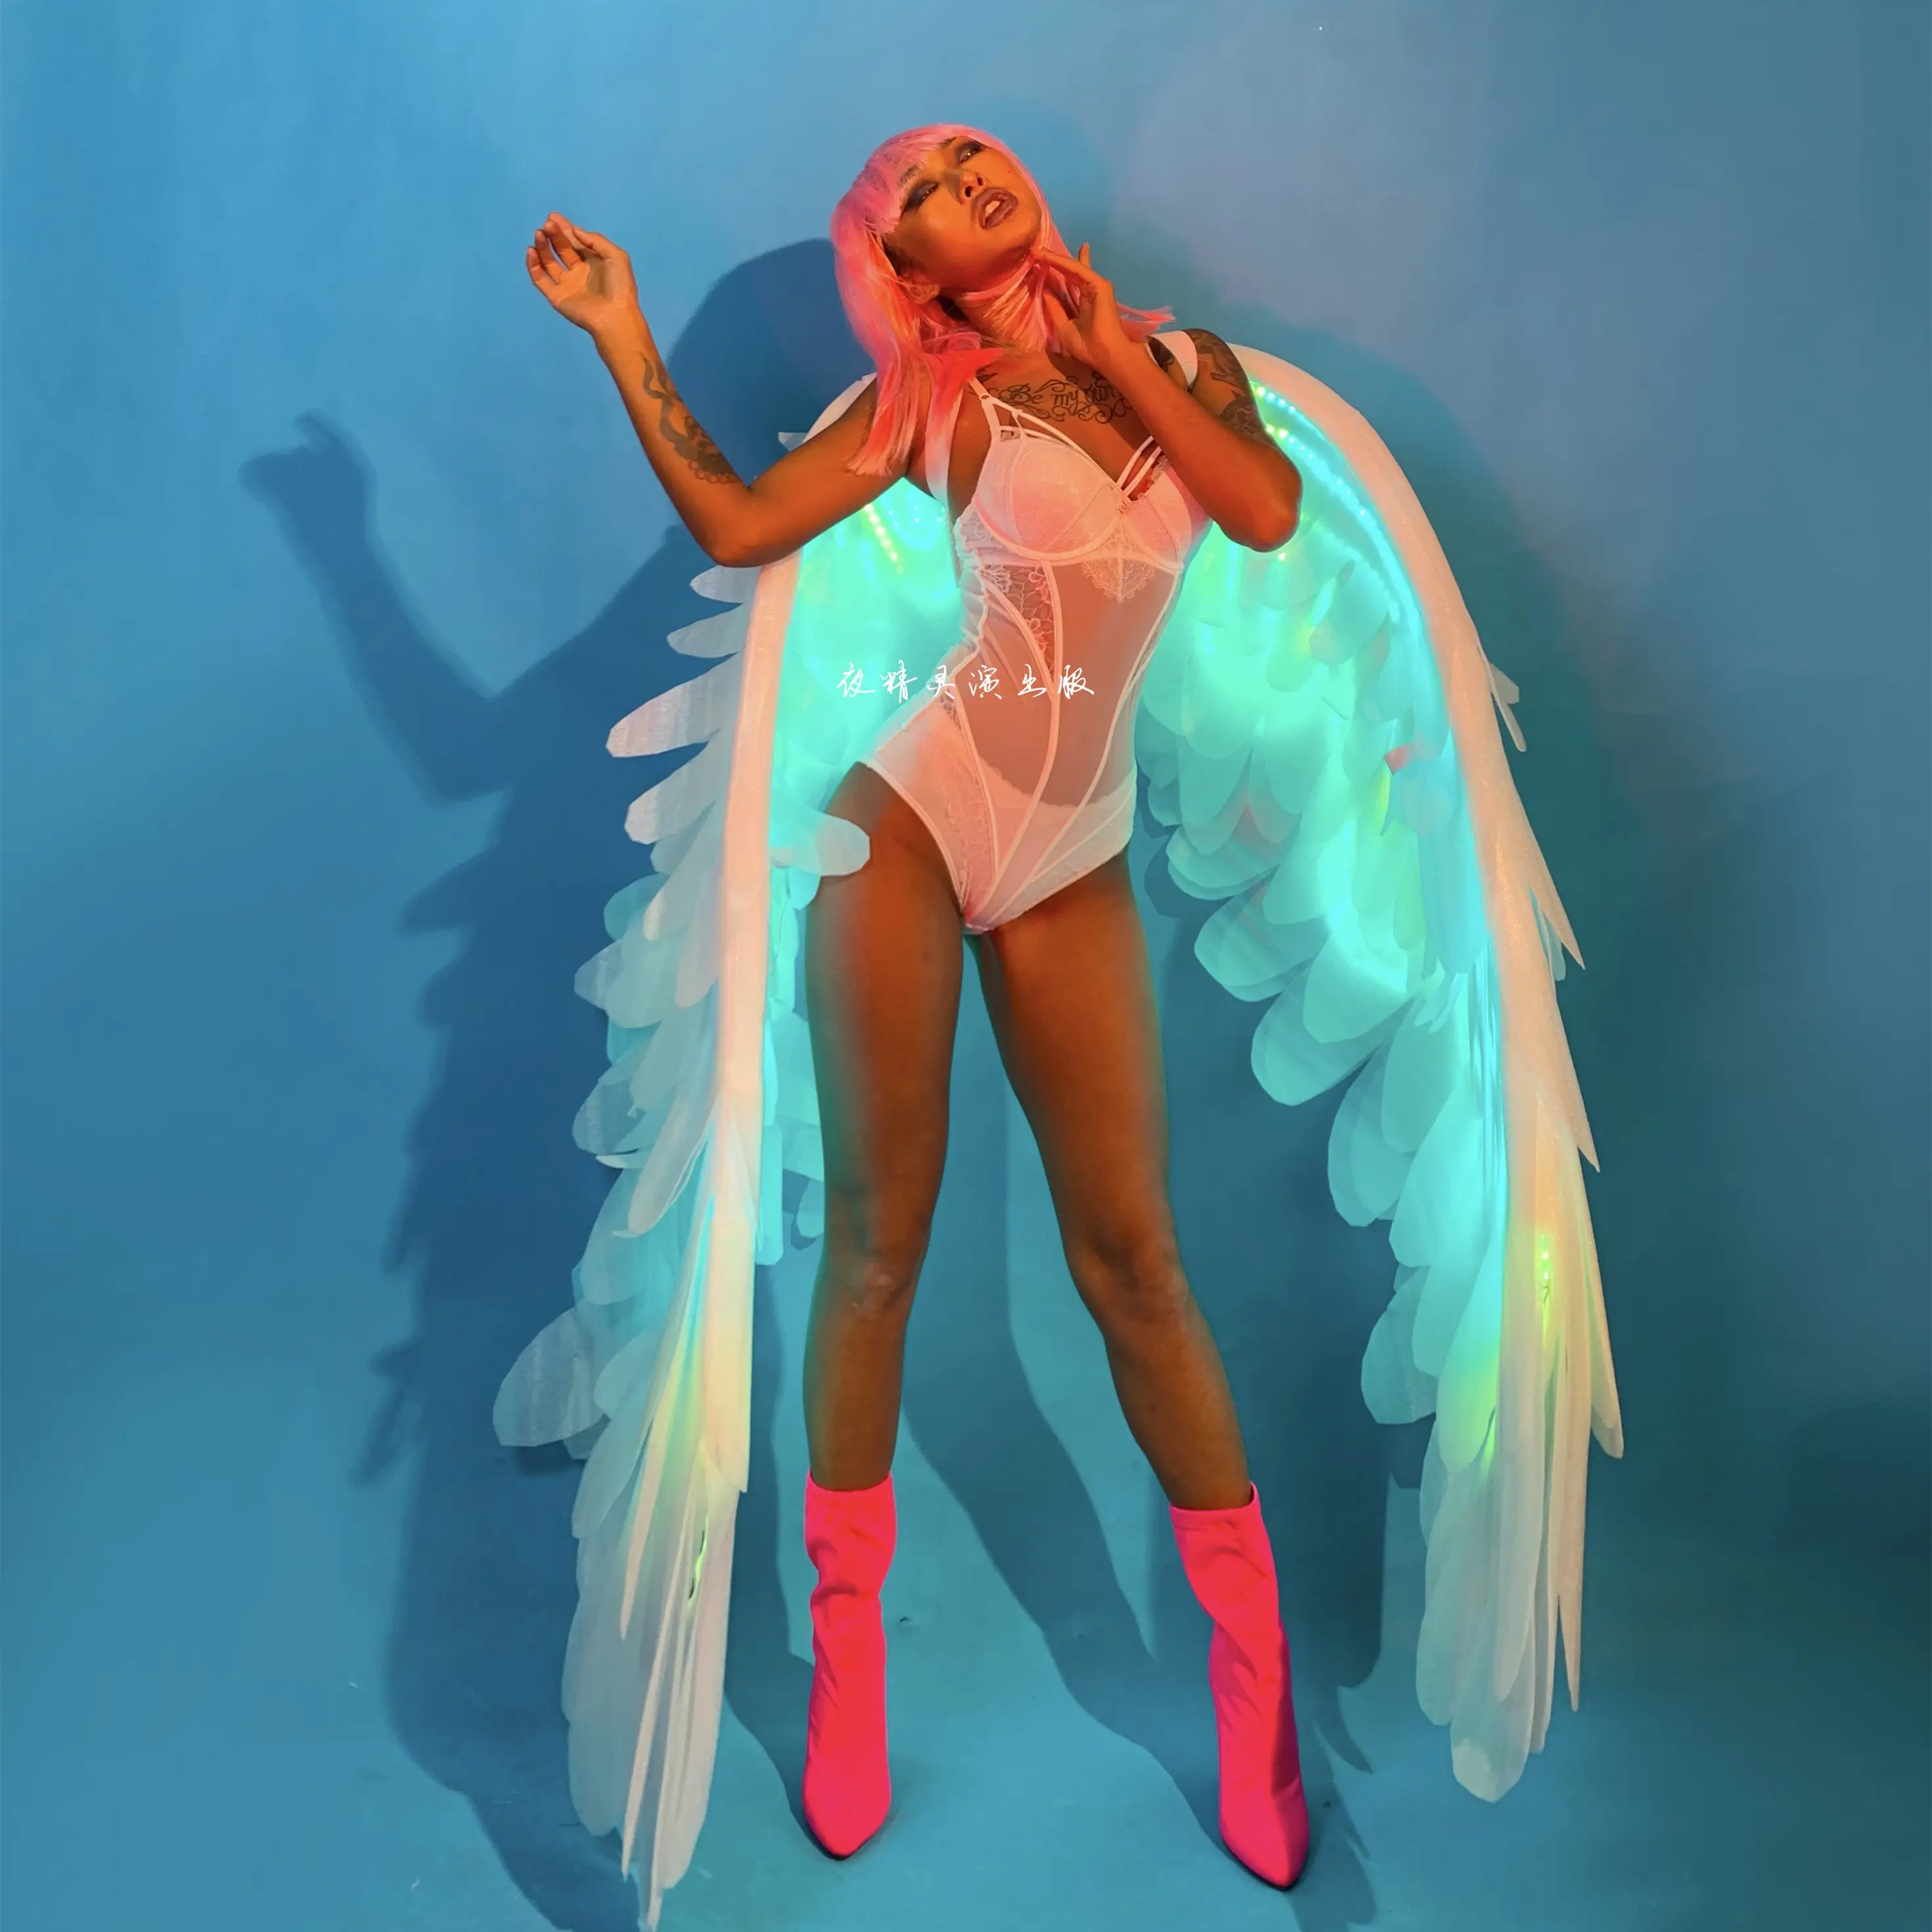 Fashion Stage Performance Wear Prop Women danza del ventre luminescenza bianca Led Feather Angel Big Wings Carnival Party Show Costume